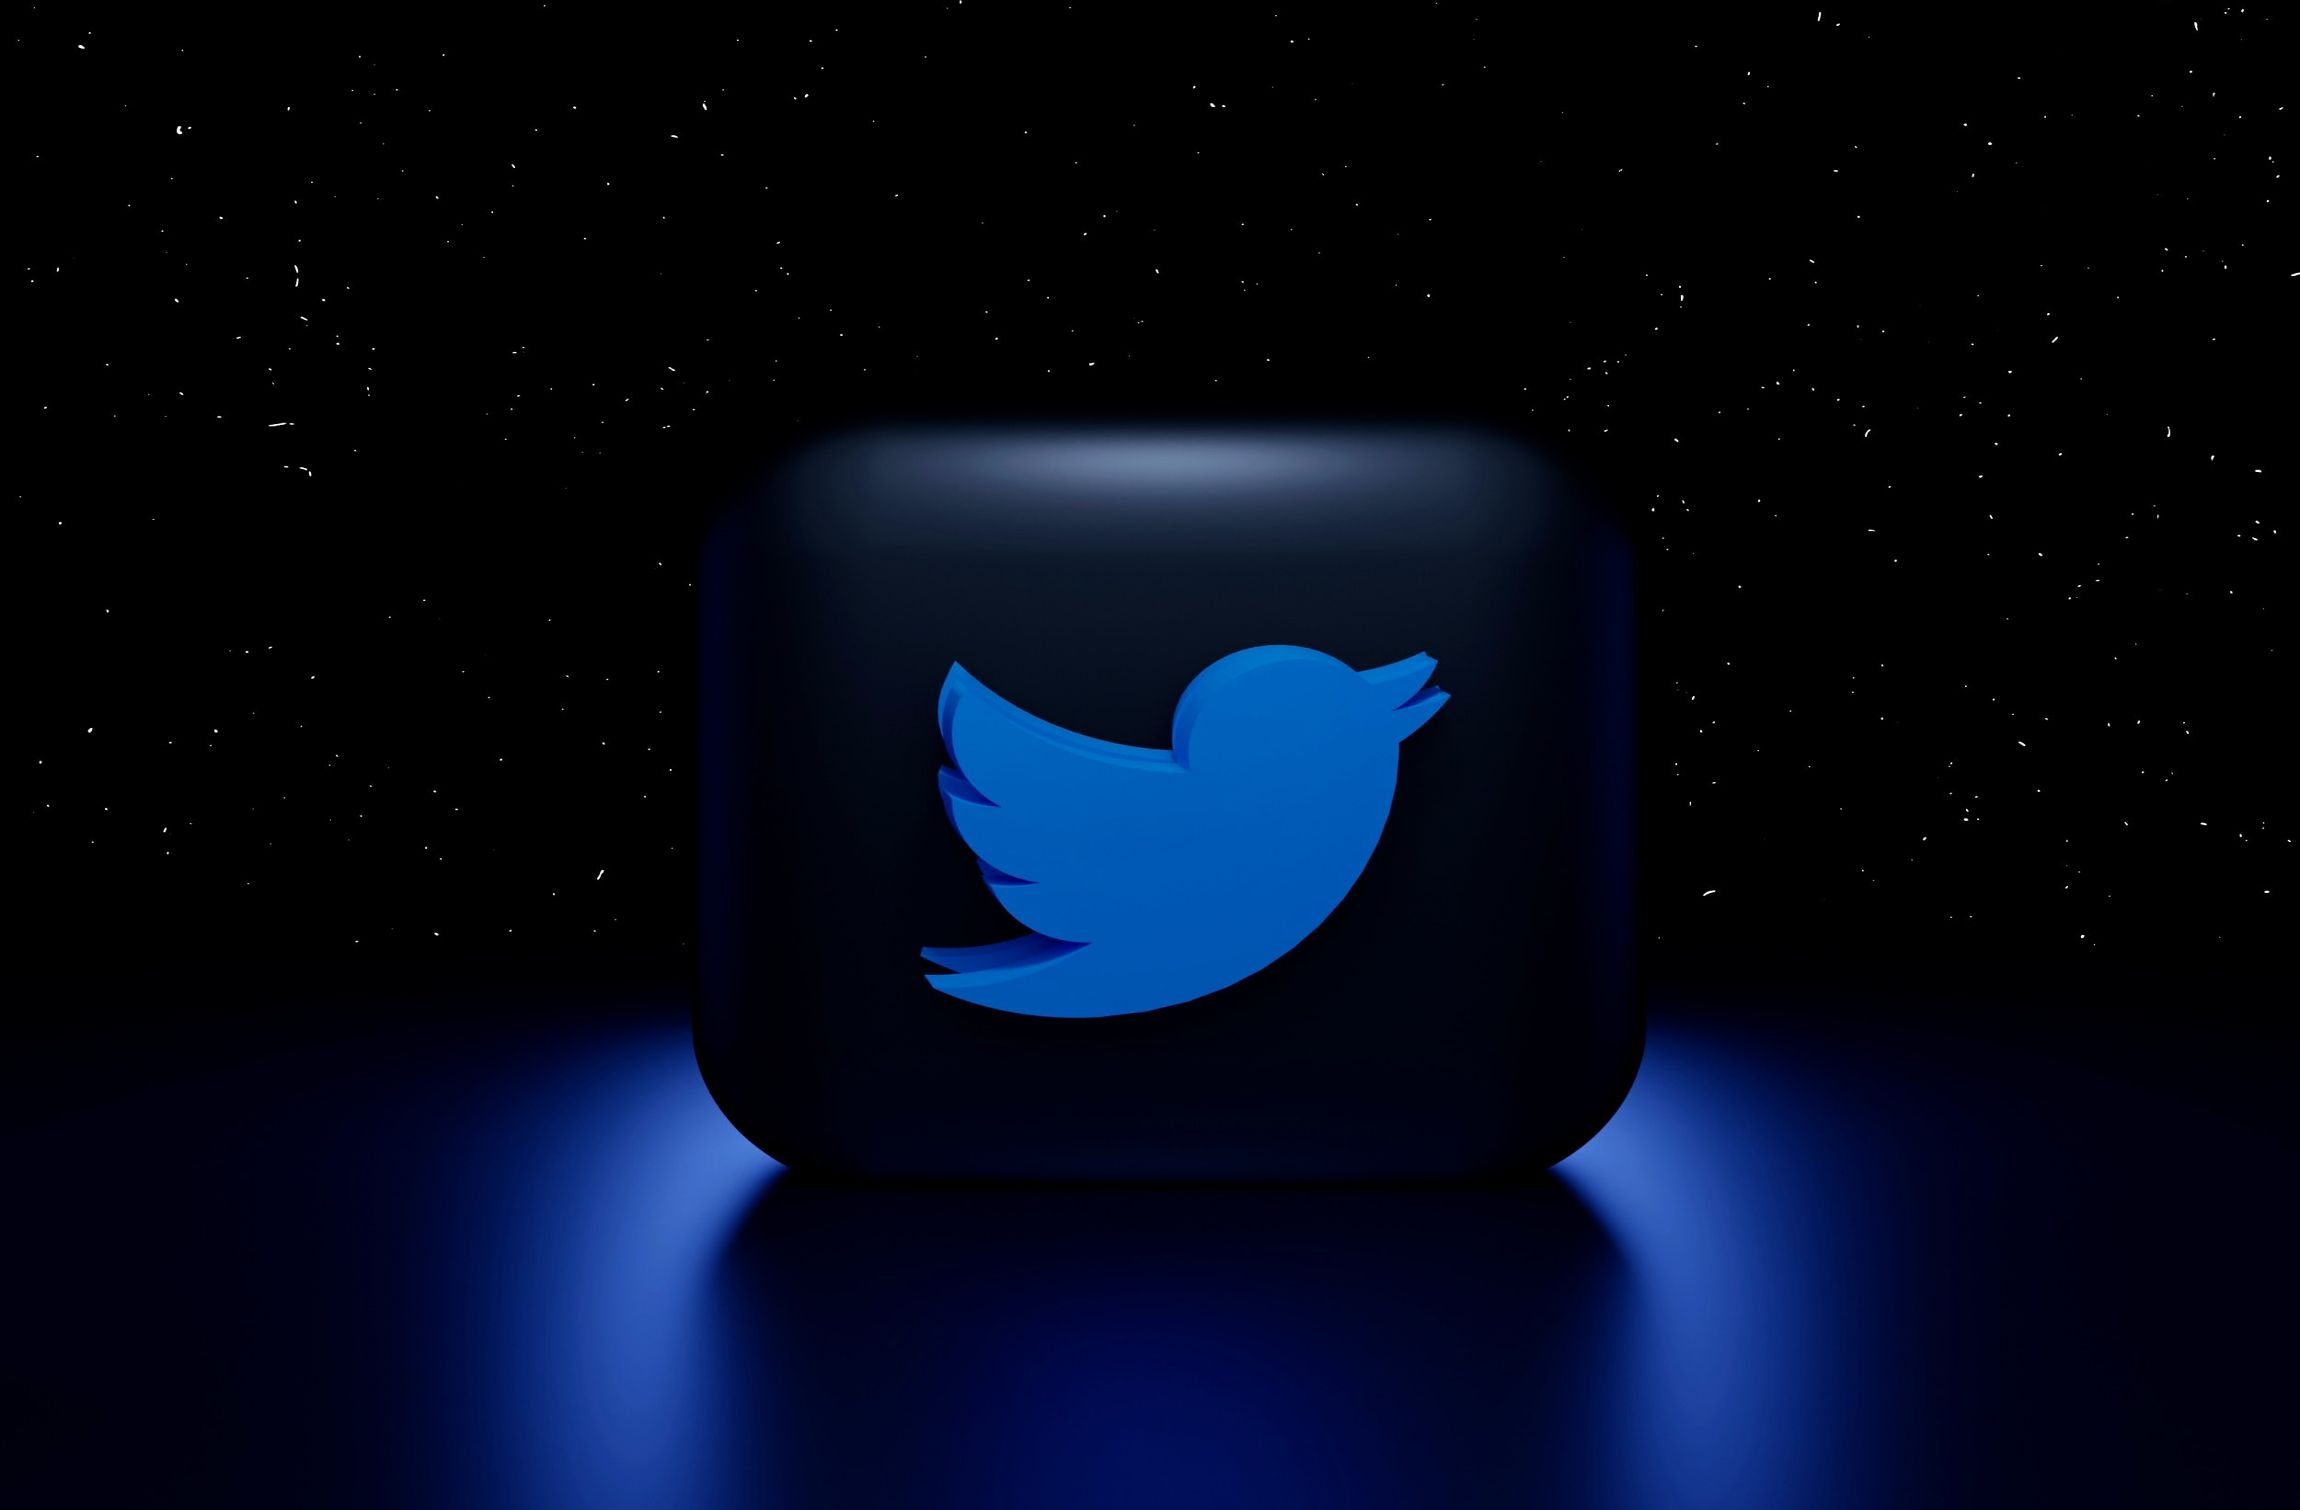 Image of the Twitter logo against a black background